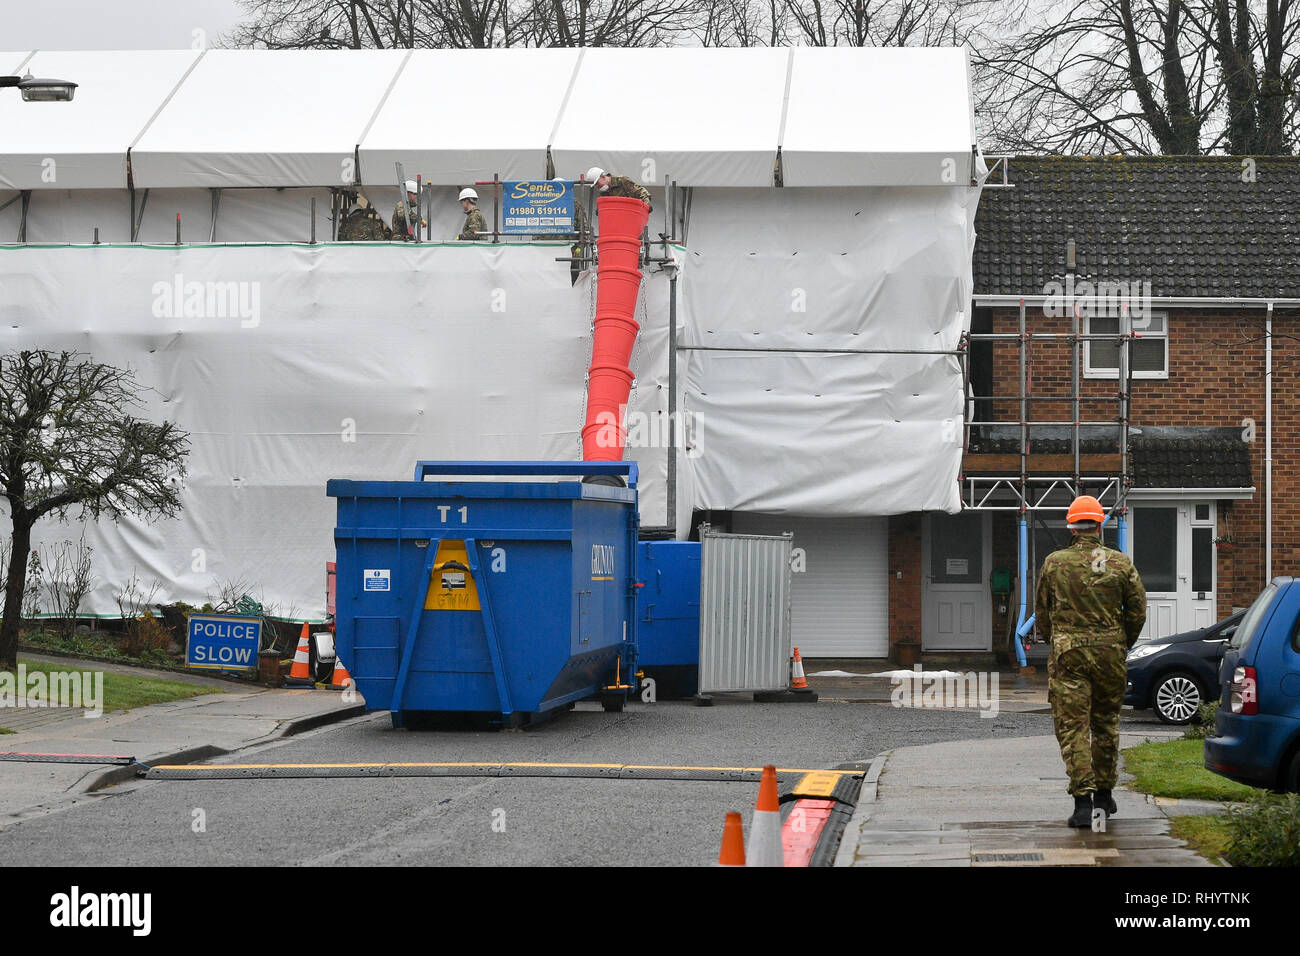 People dressed in British Army fatigues remove bricks and rubble from the Skripal's house in Salisbury, where the roof is being taken down after the novichok attack. Stock Photo